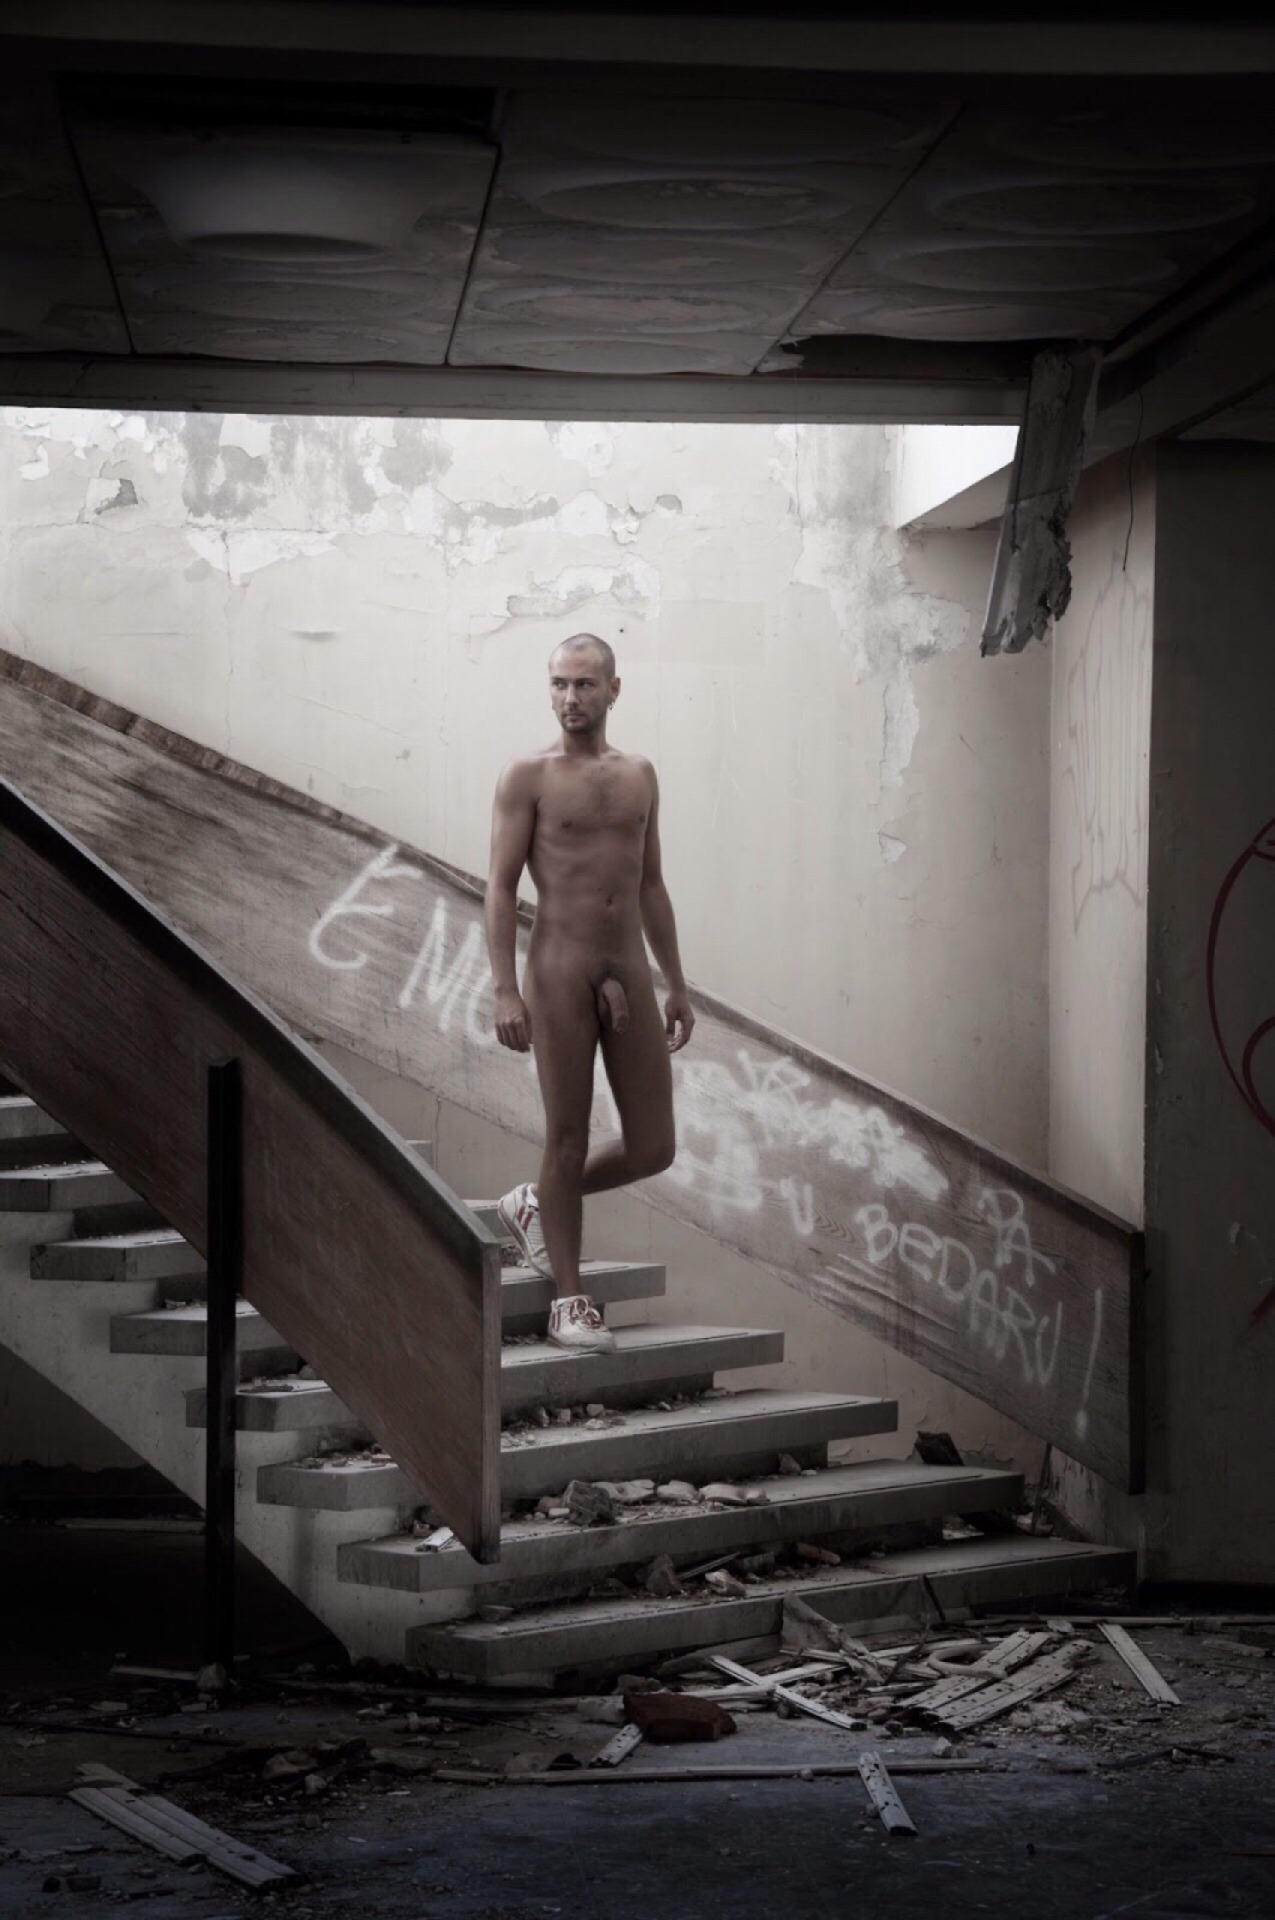 mundomen:

Another great nude male shot in an abandoned building. I want to do shoots like this!!